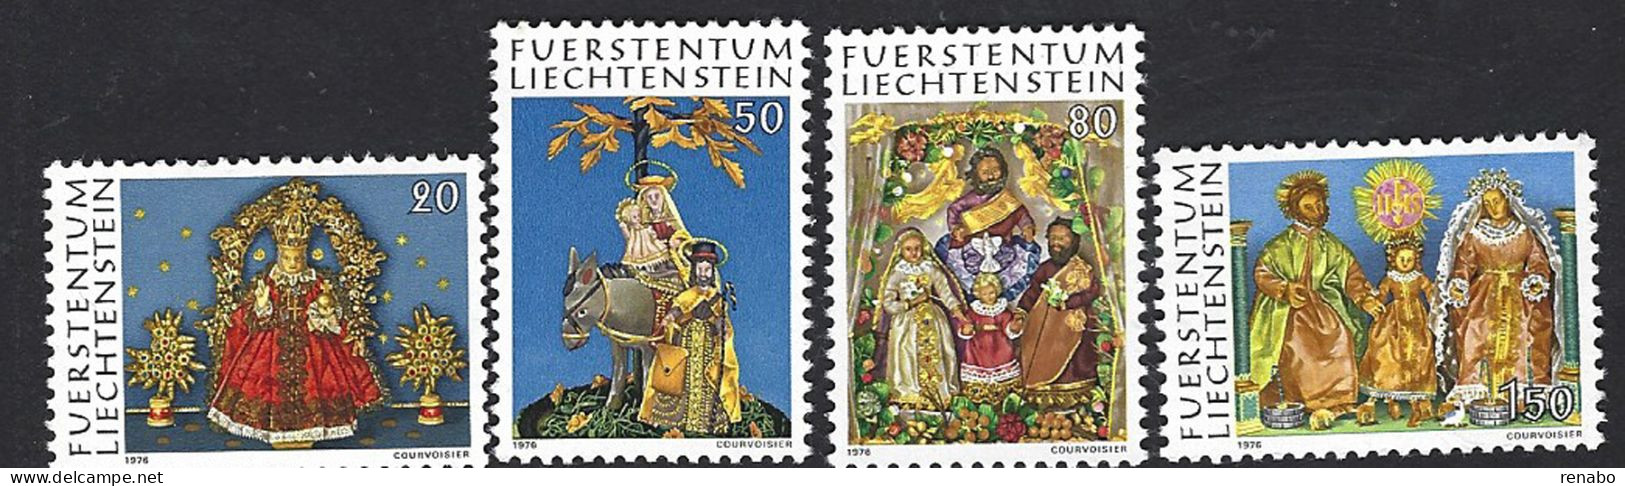 Liechtenstein 1976; Christmas Complete Set, Sacra Famiglia Con Gatto, Holy Family With CAT. - Chats Domestiques